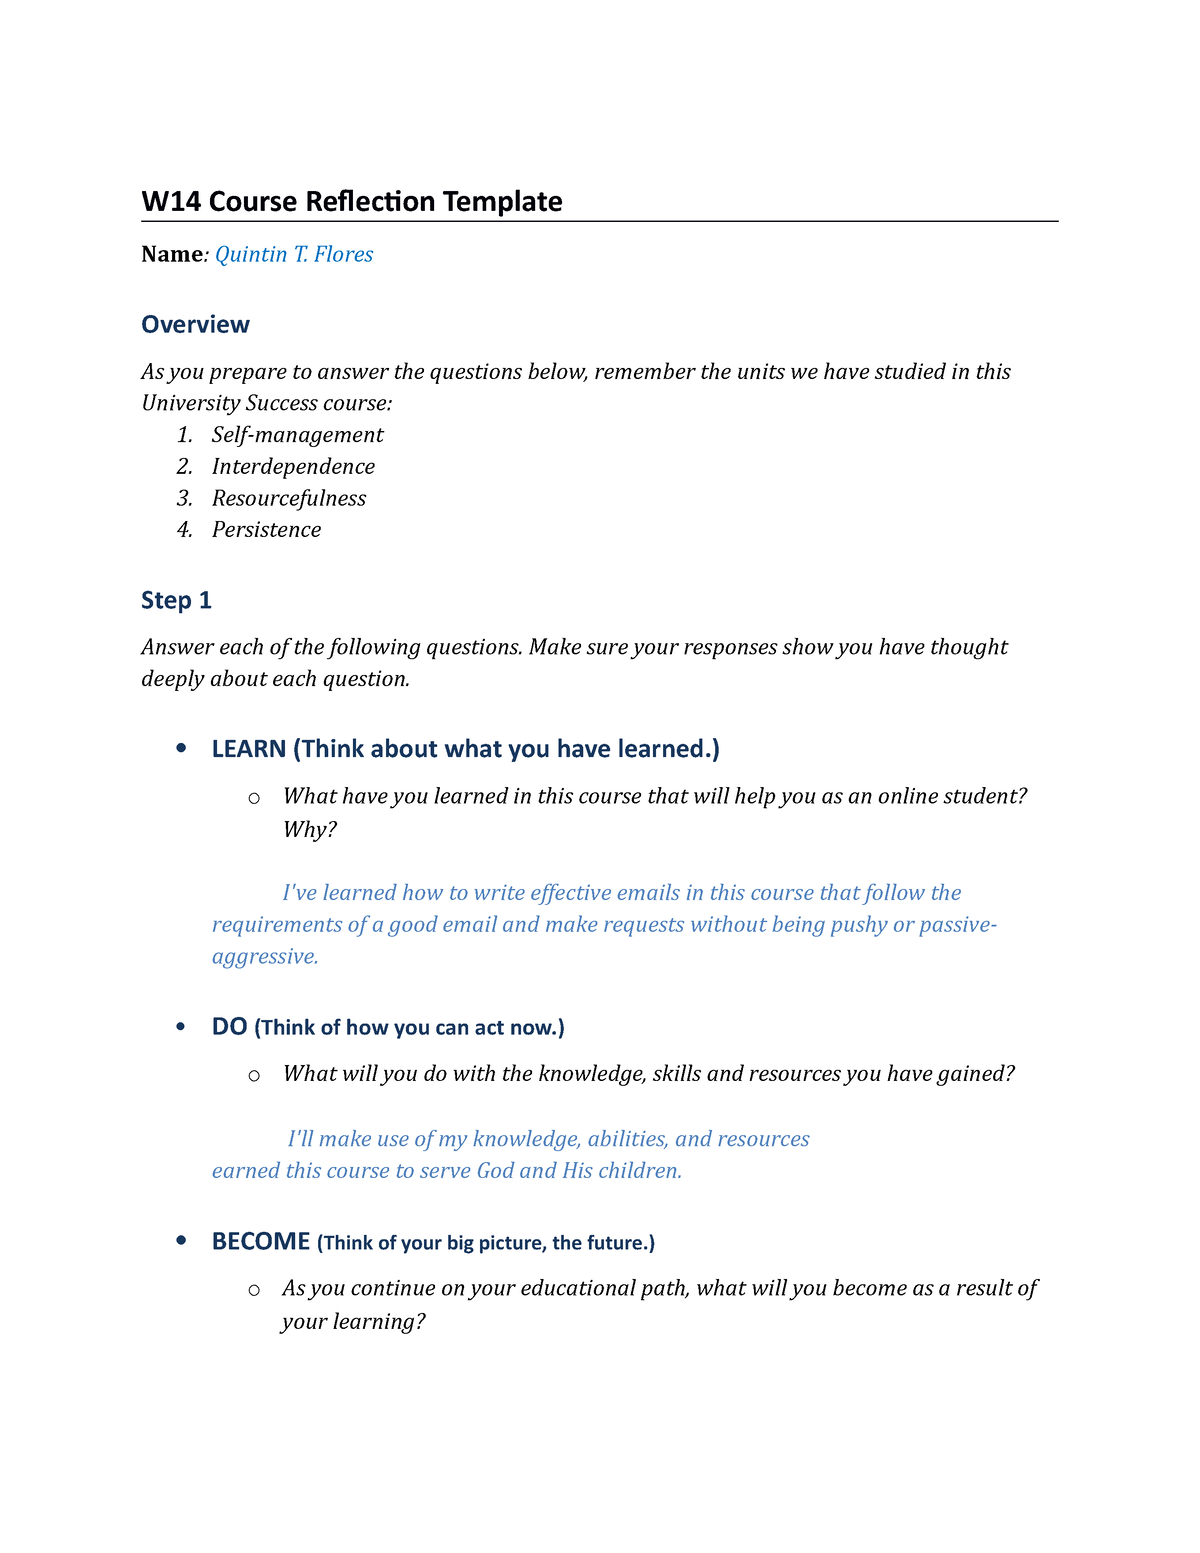 Pc Document W Reflection Template W Course Reflection Template